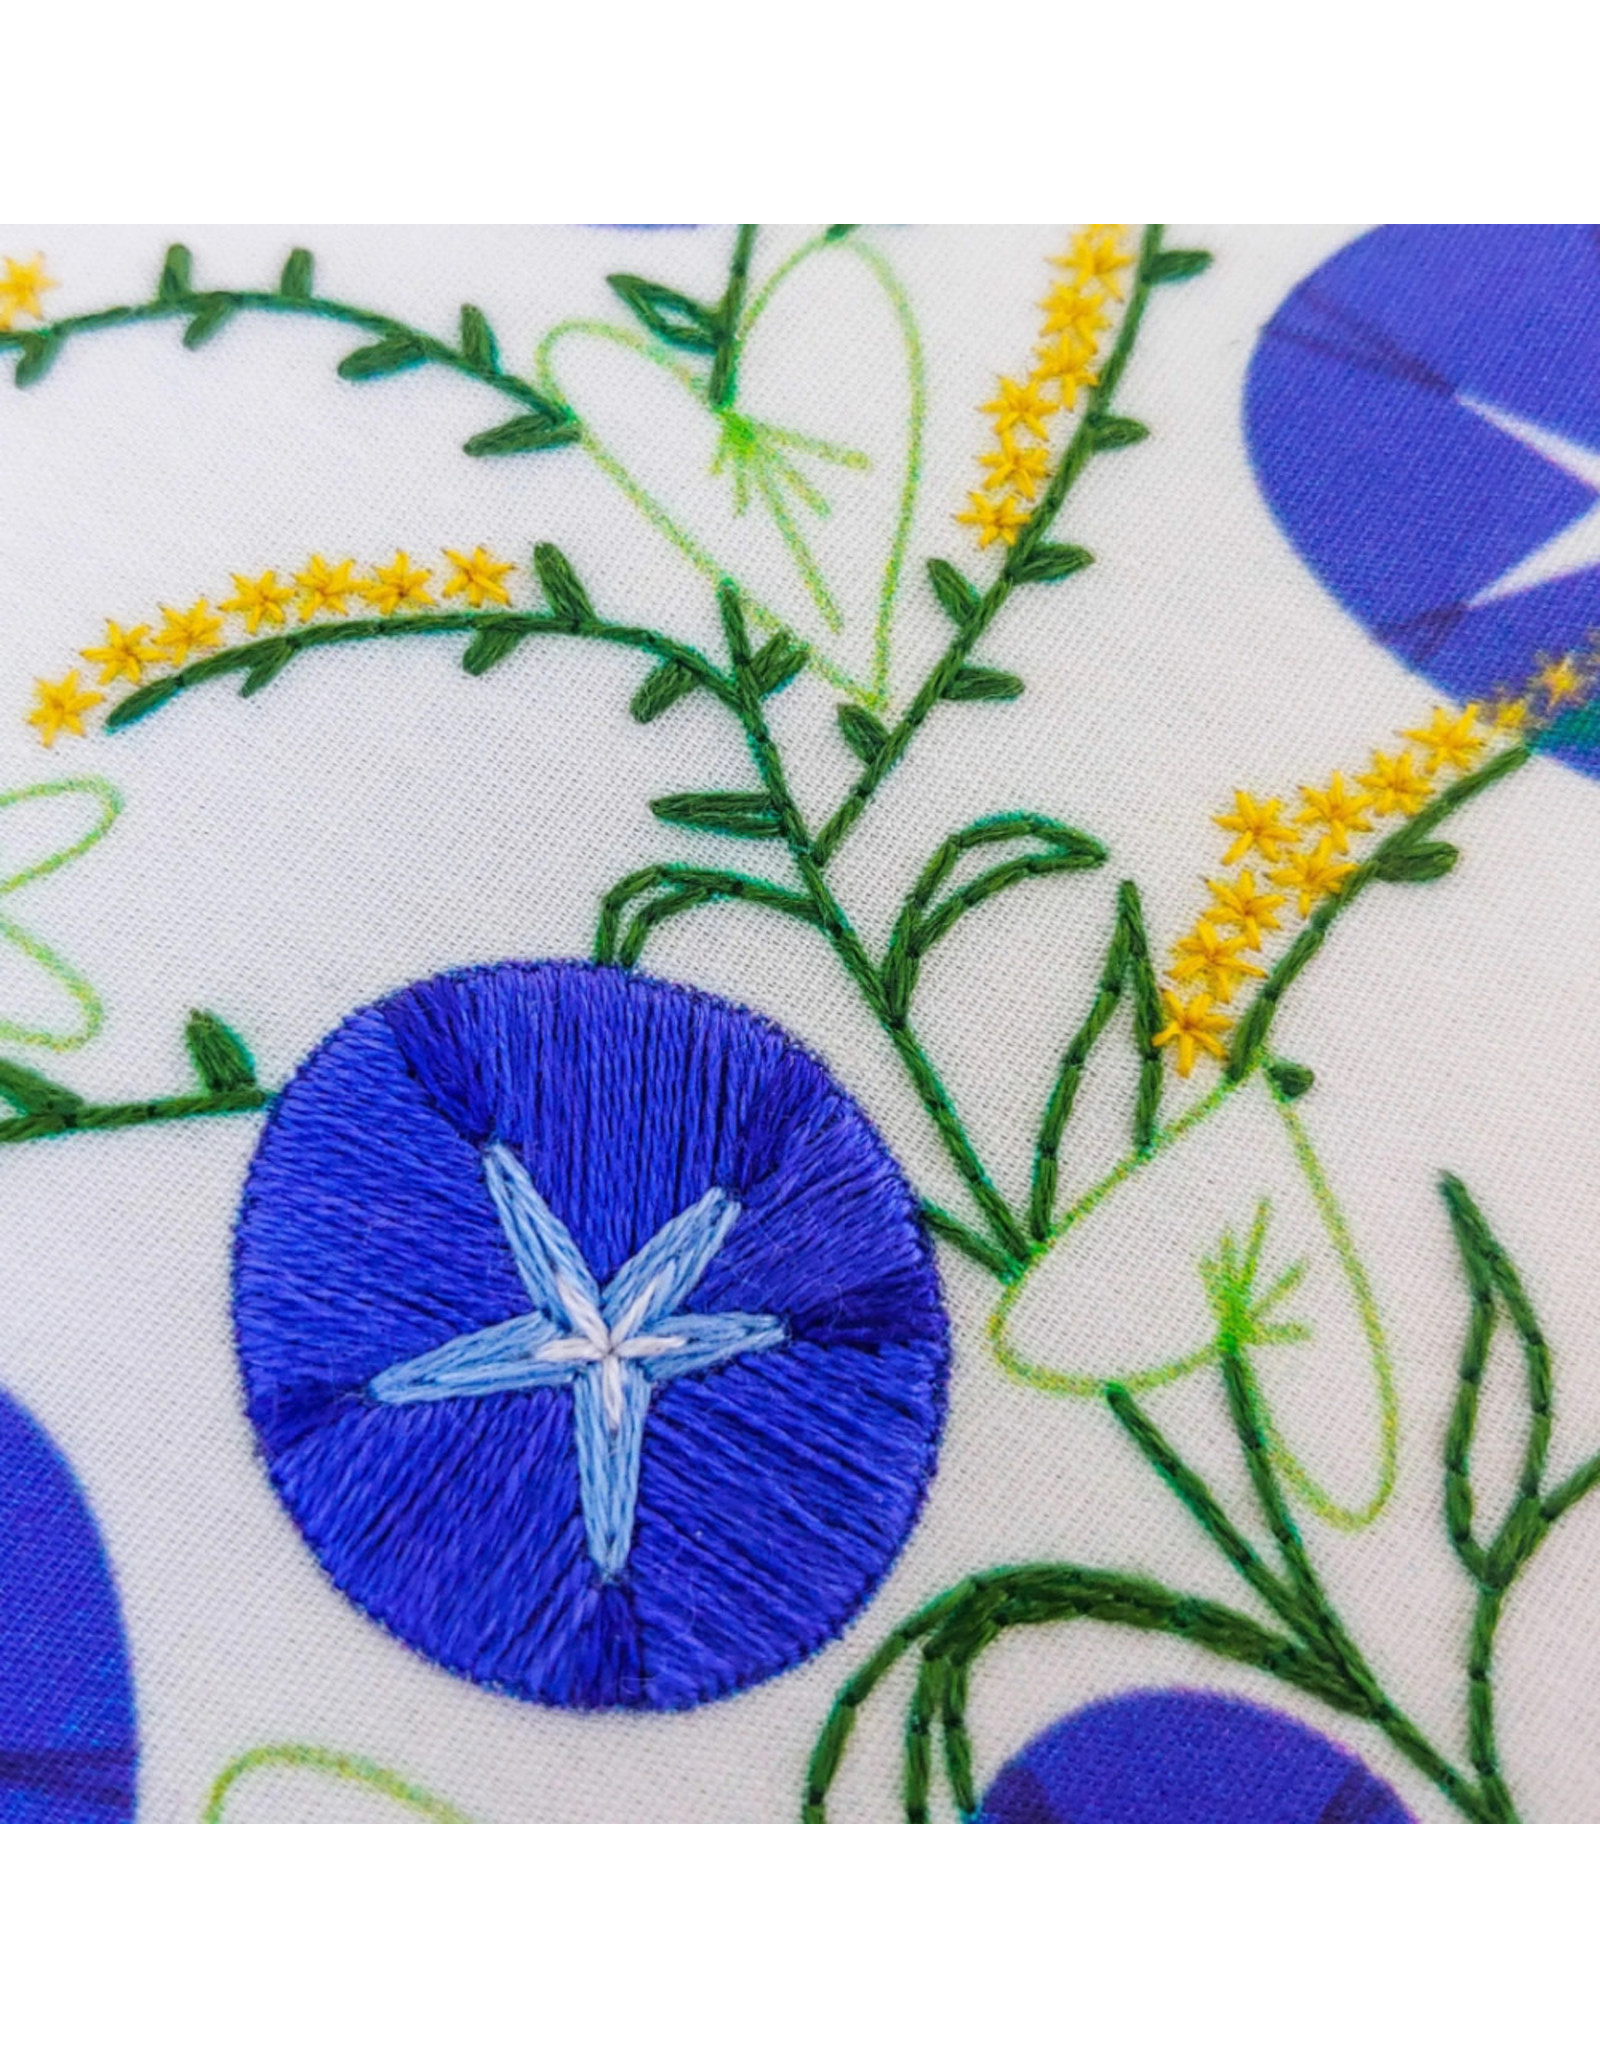 cozyblue Morning Glory Embroidery Kit from cozyblue